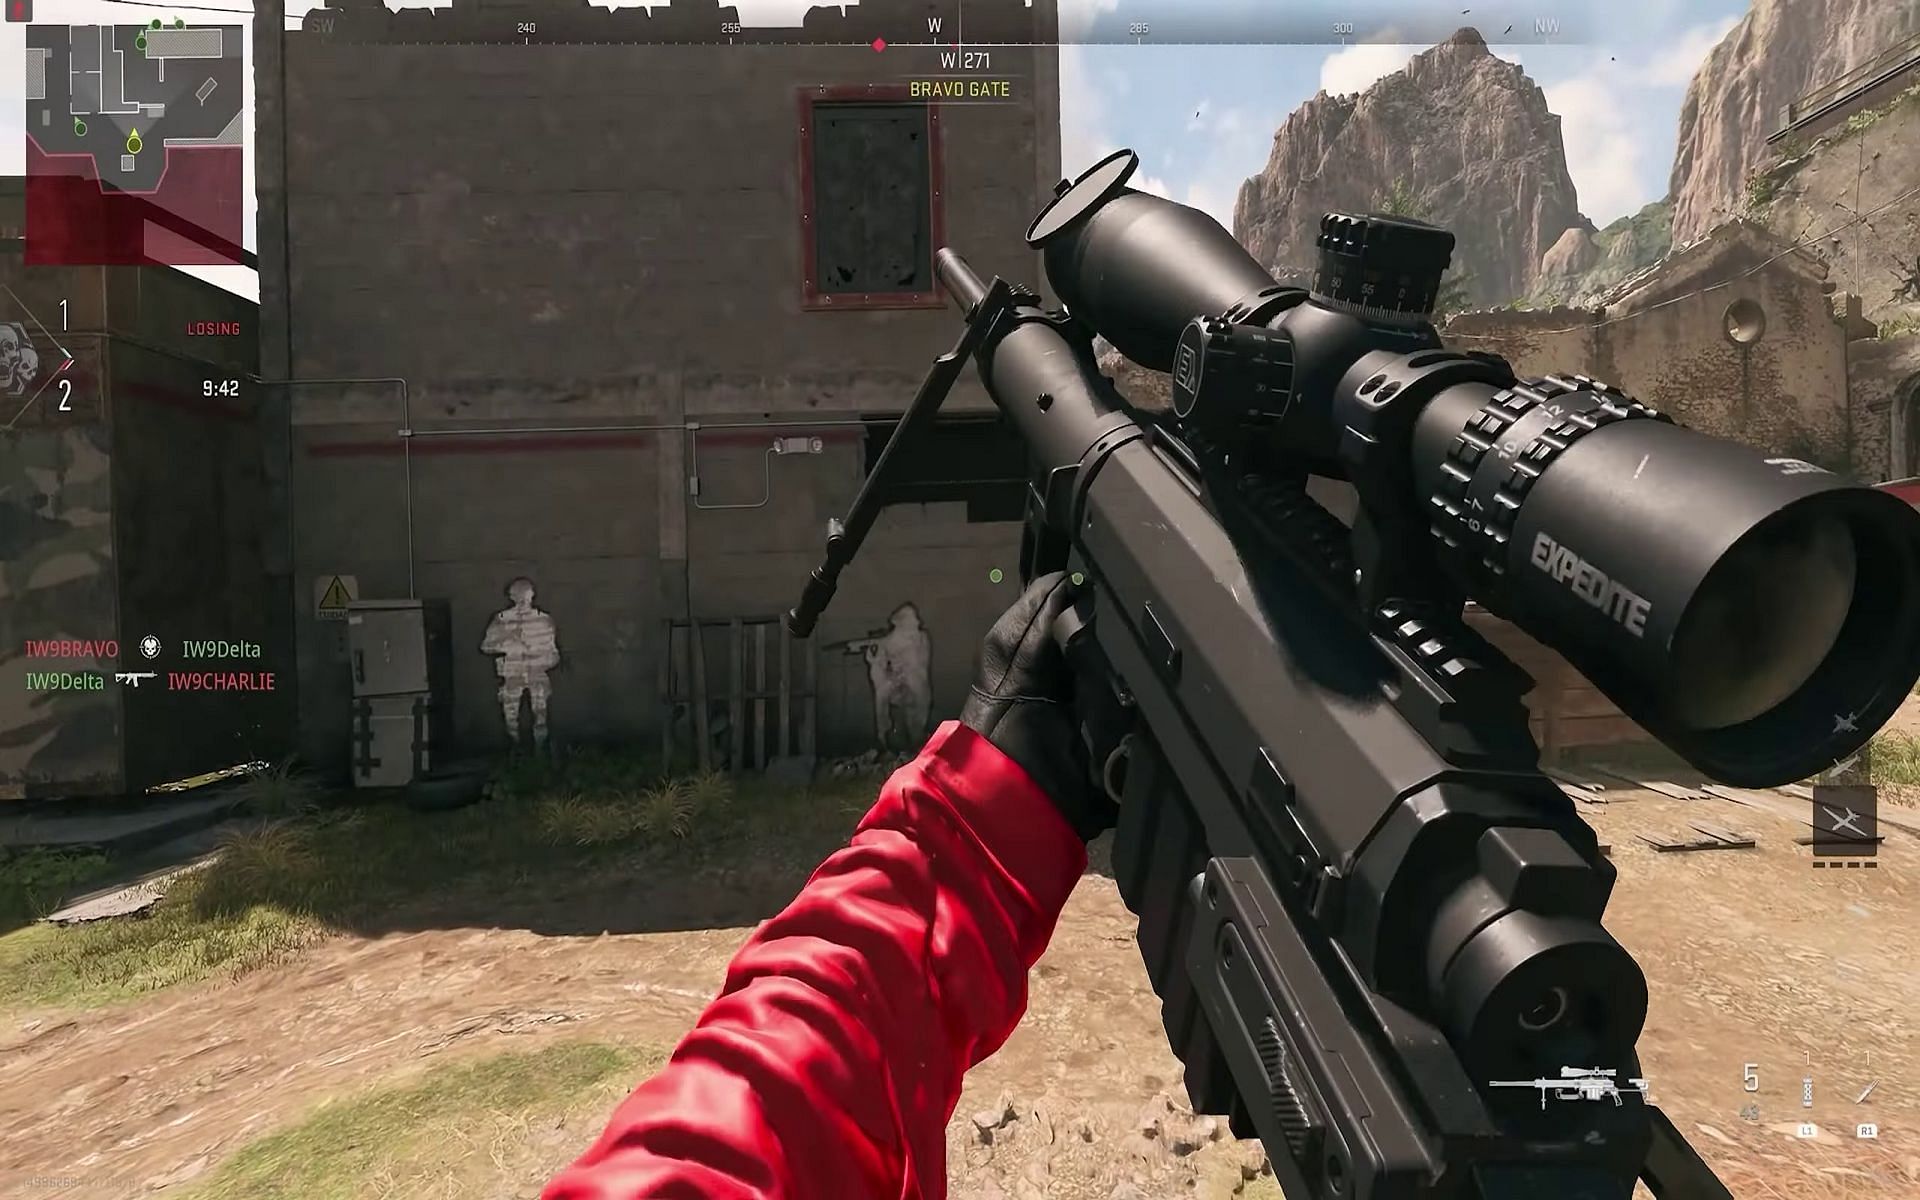 FJX Imperium is the classic Intervention in Modern Warfare 2 (Image via @FaZeDirty on YouTube)